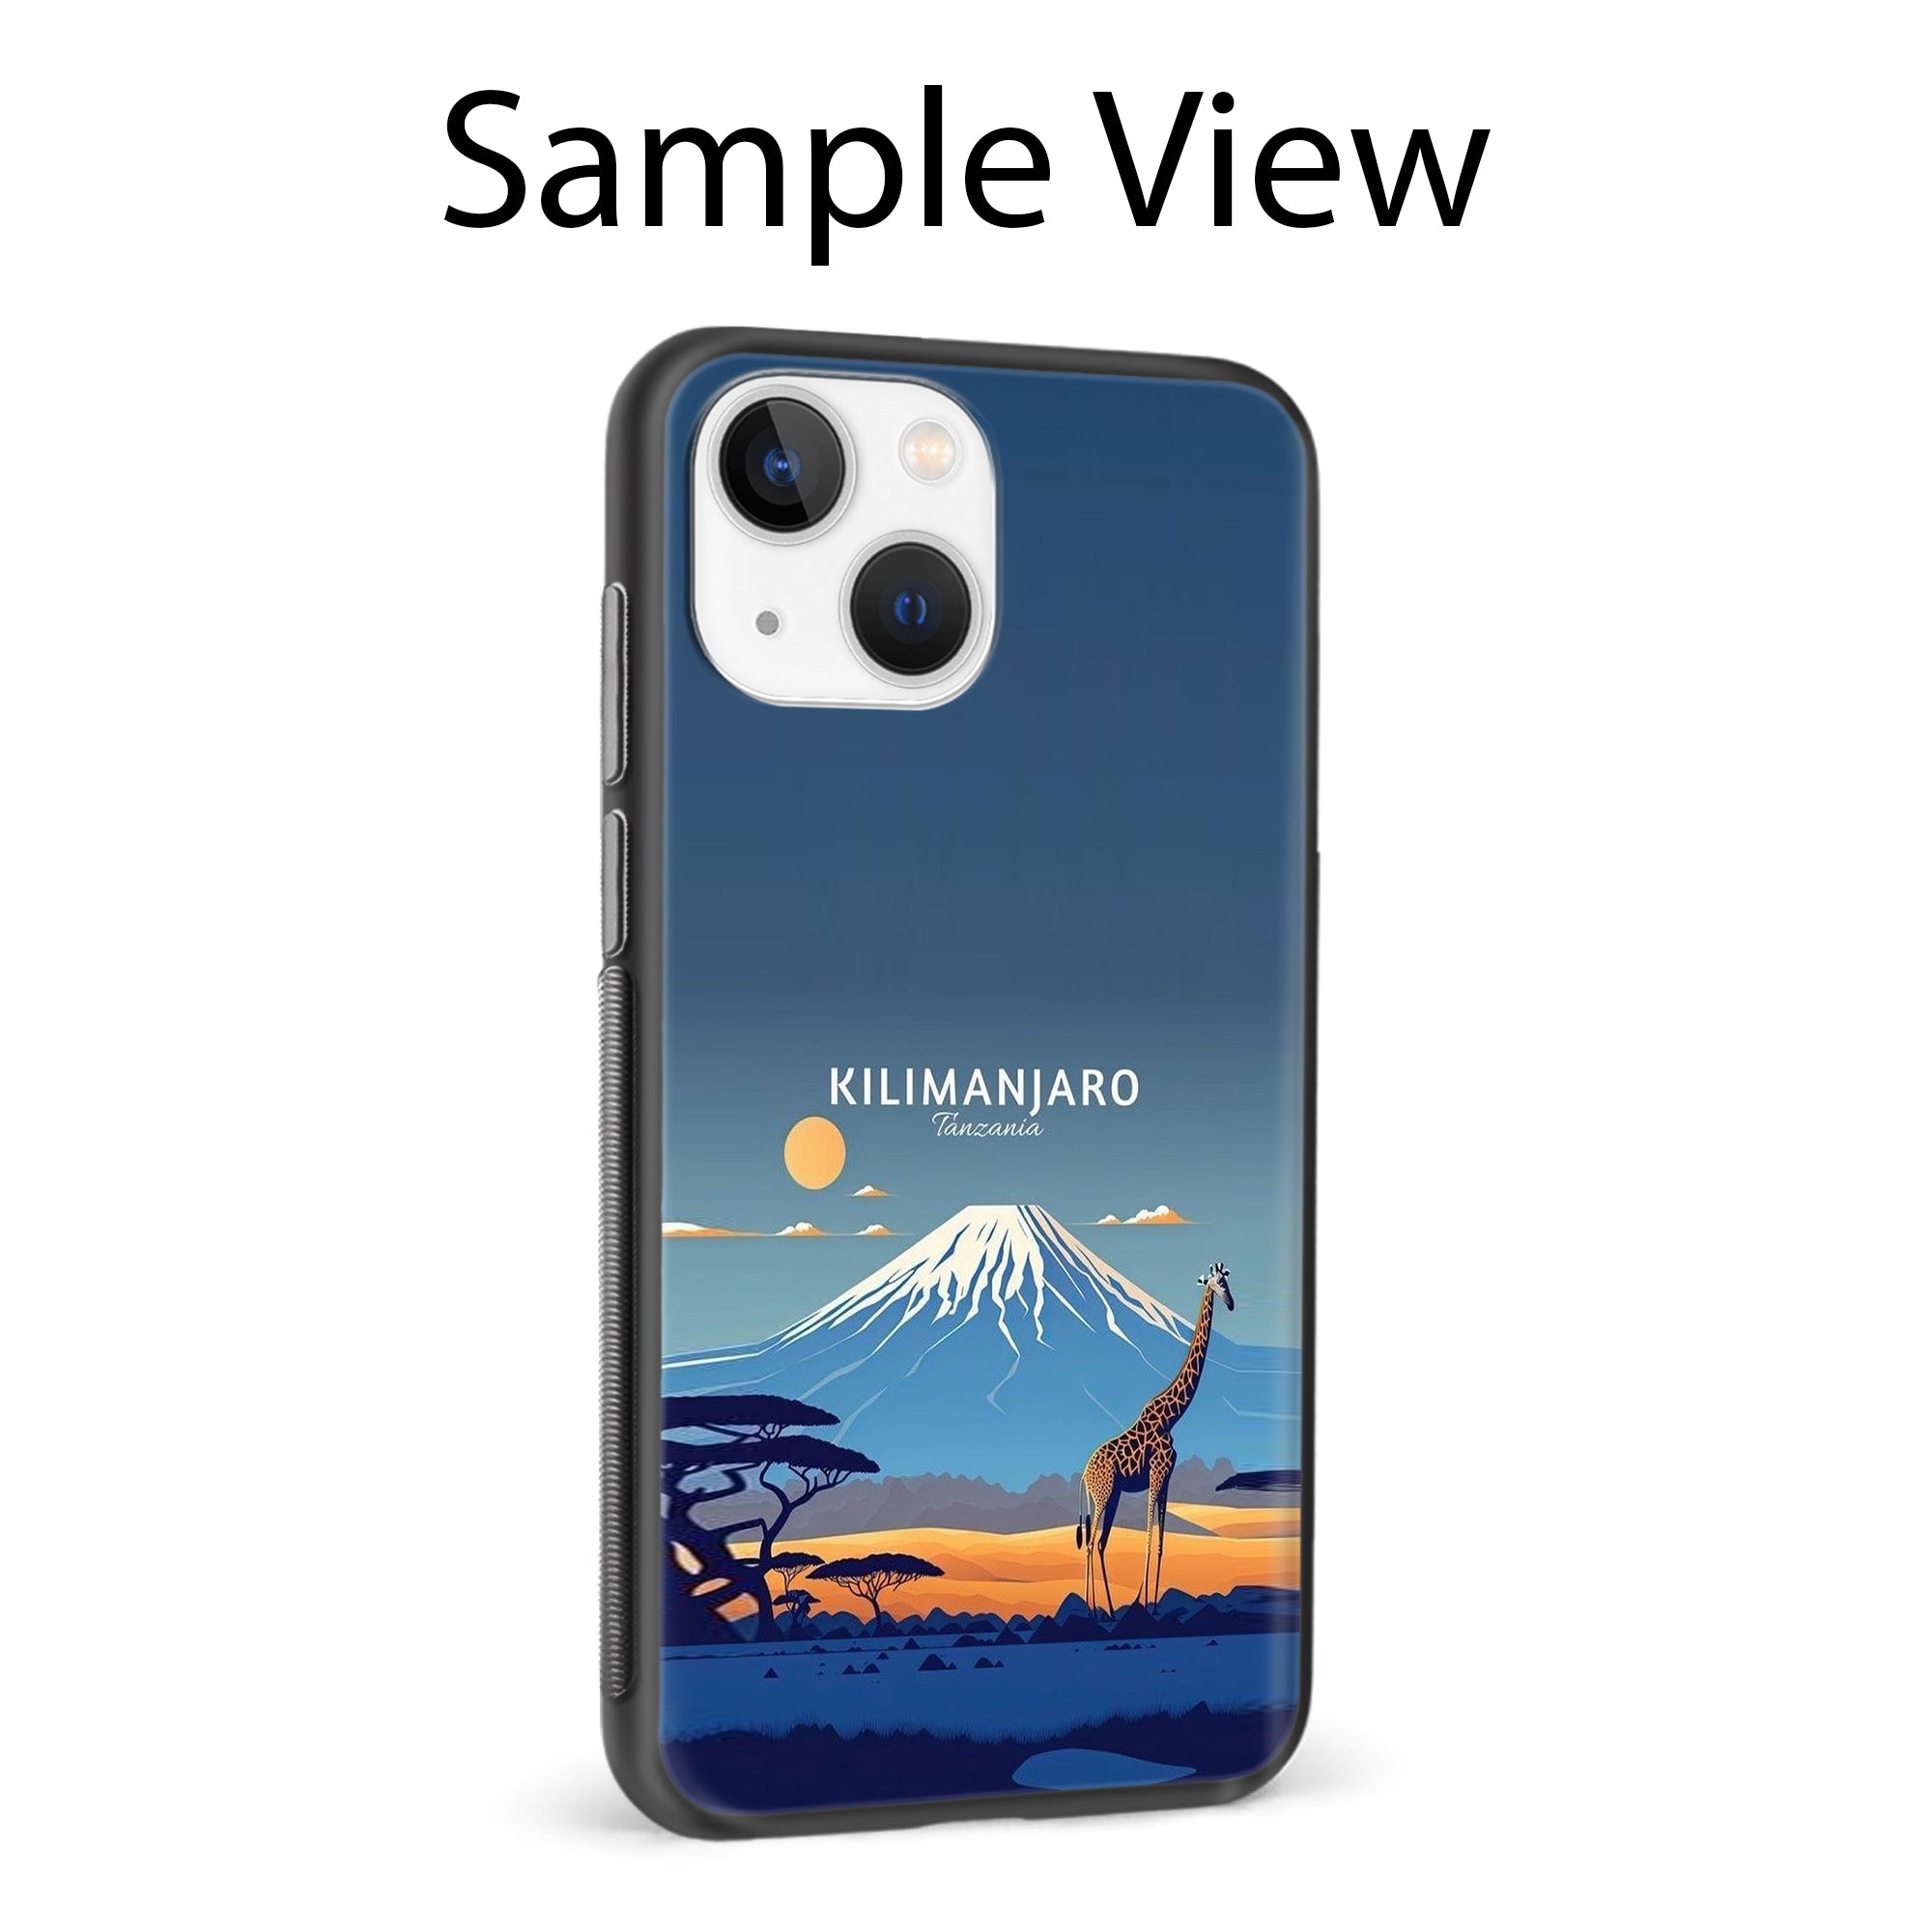 Buy Kilimanjaro Metal-Silicon Back Mobile Phone Case/Cover For Samsung Galaxy A50 / A50s / A30s Online